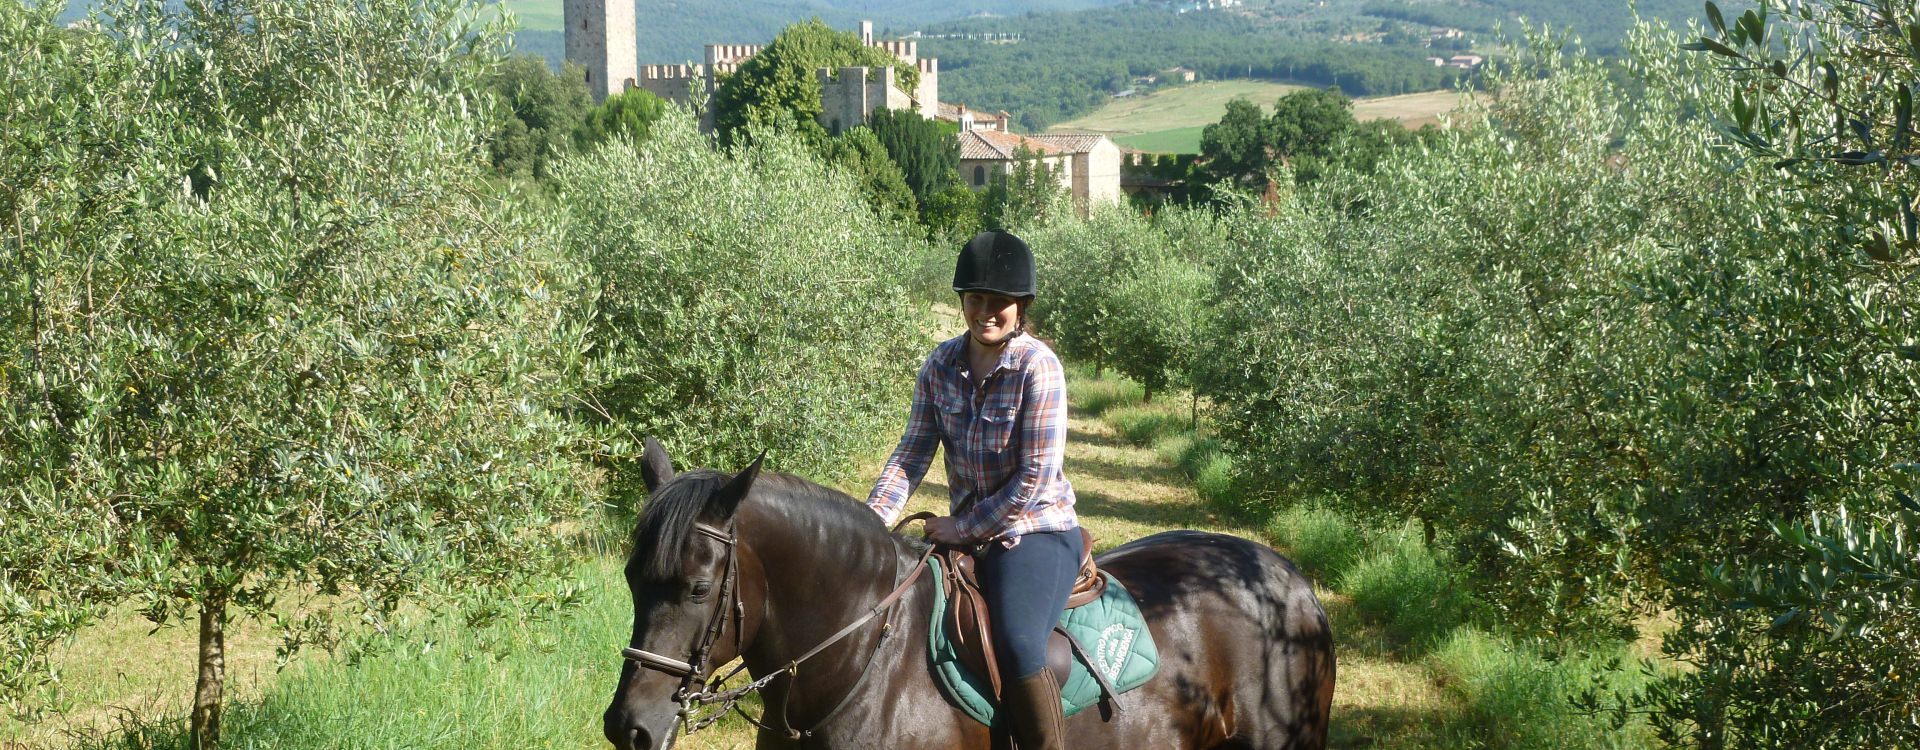 Riding in Tuscany